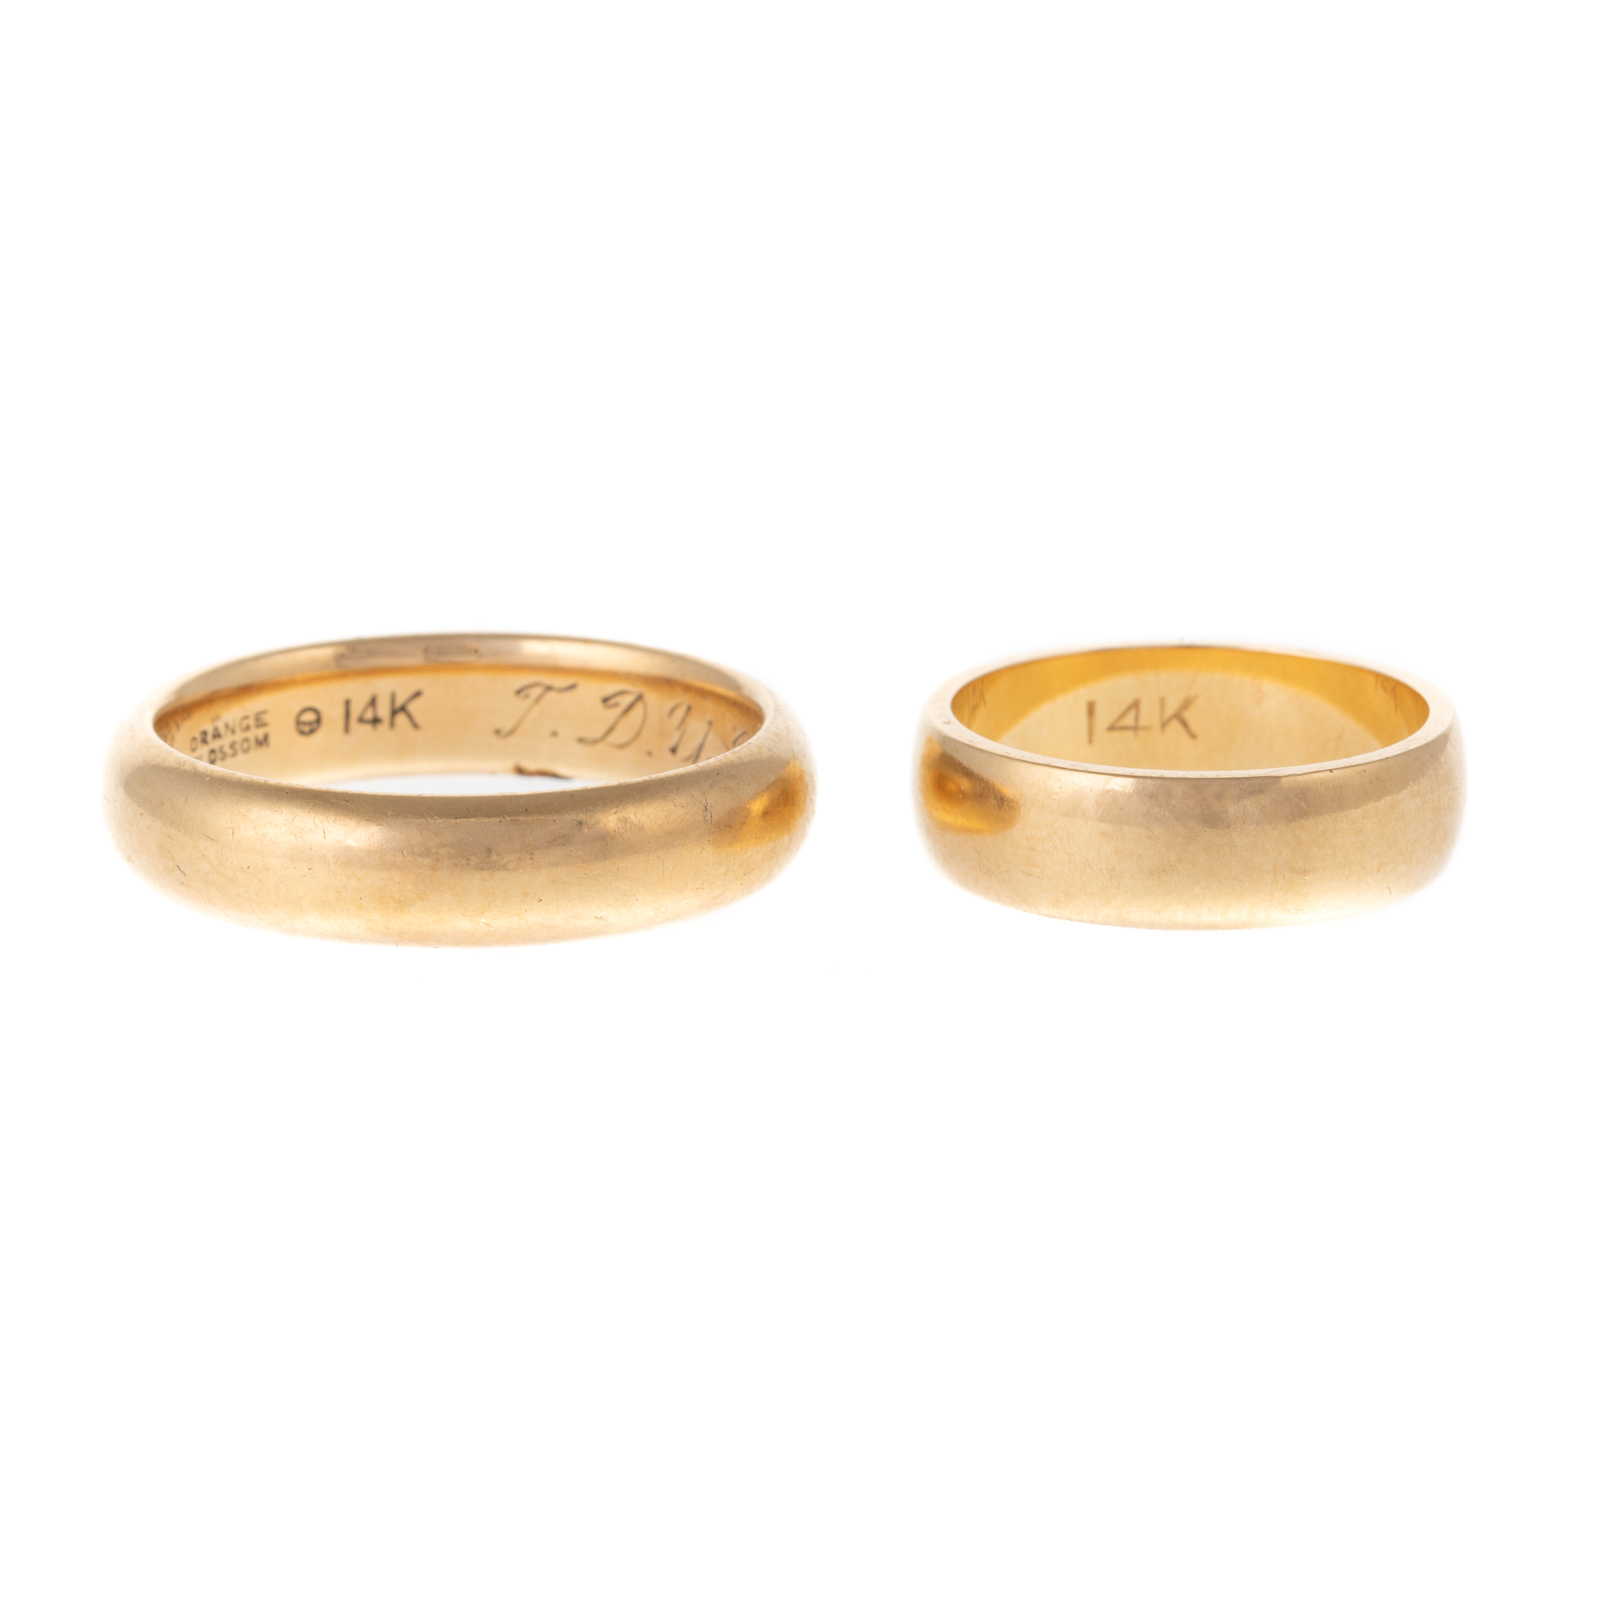 A PAIR OF VINTAGE 14K WEDDING BANDS 29dfc0